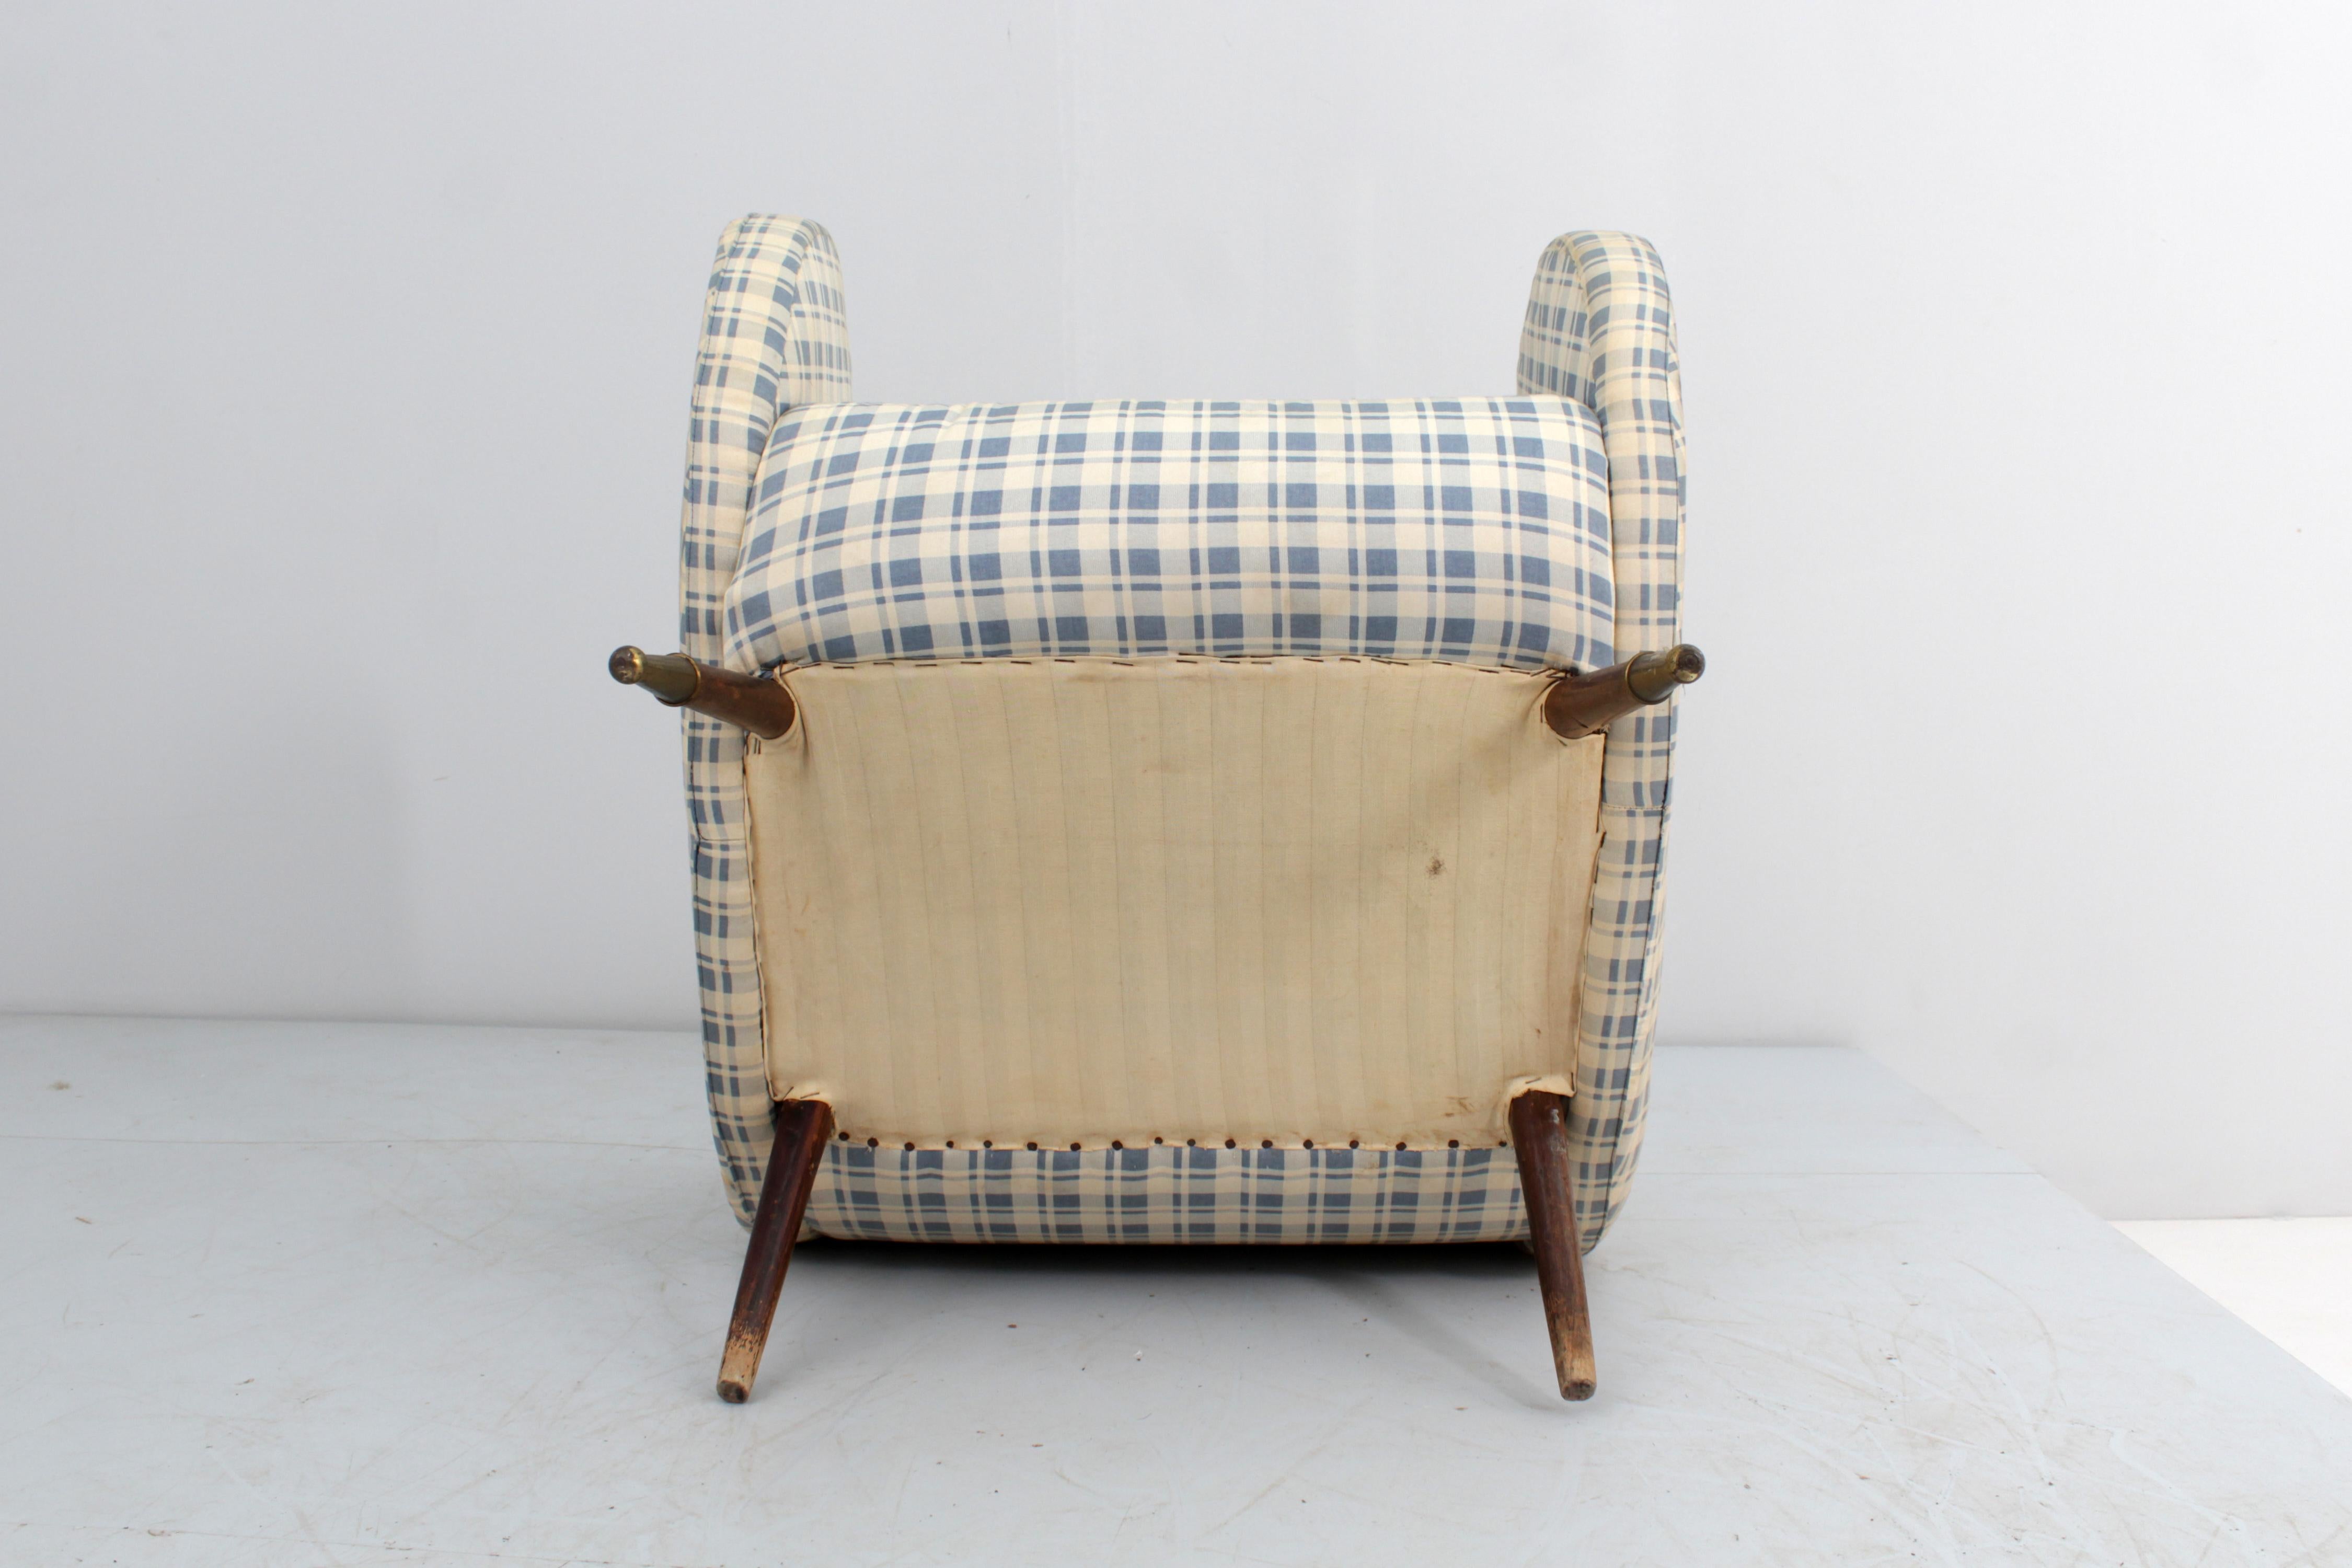 Very beautiful armchair with wooden structure covered in checkered fabric, with wooden feet and brass tips. Italian production in the style of the 